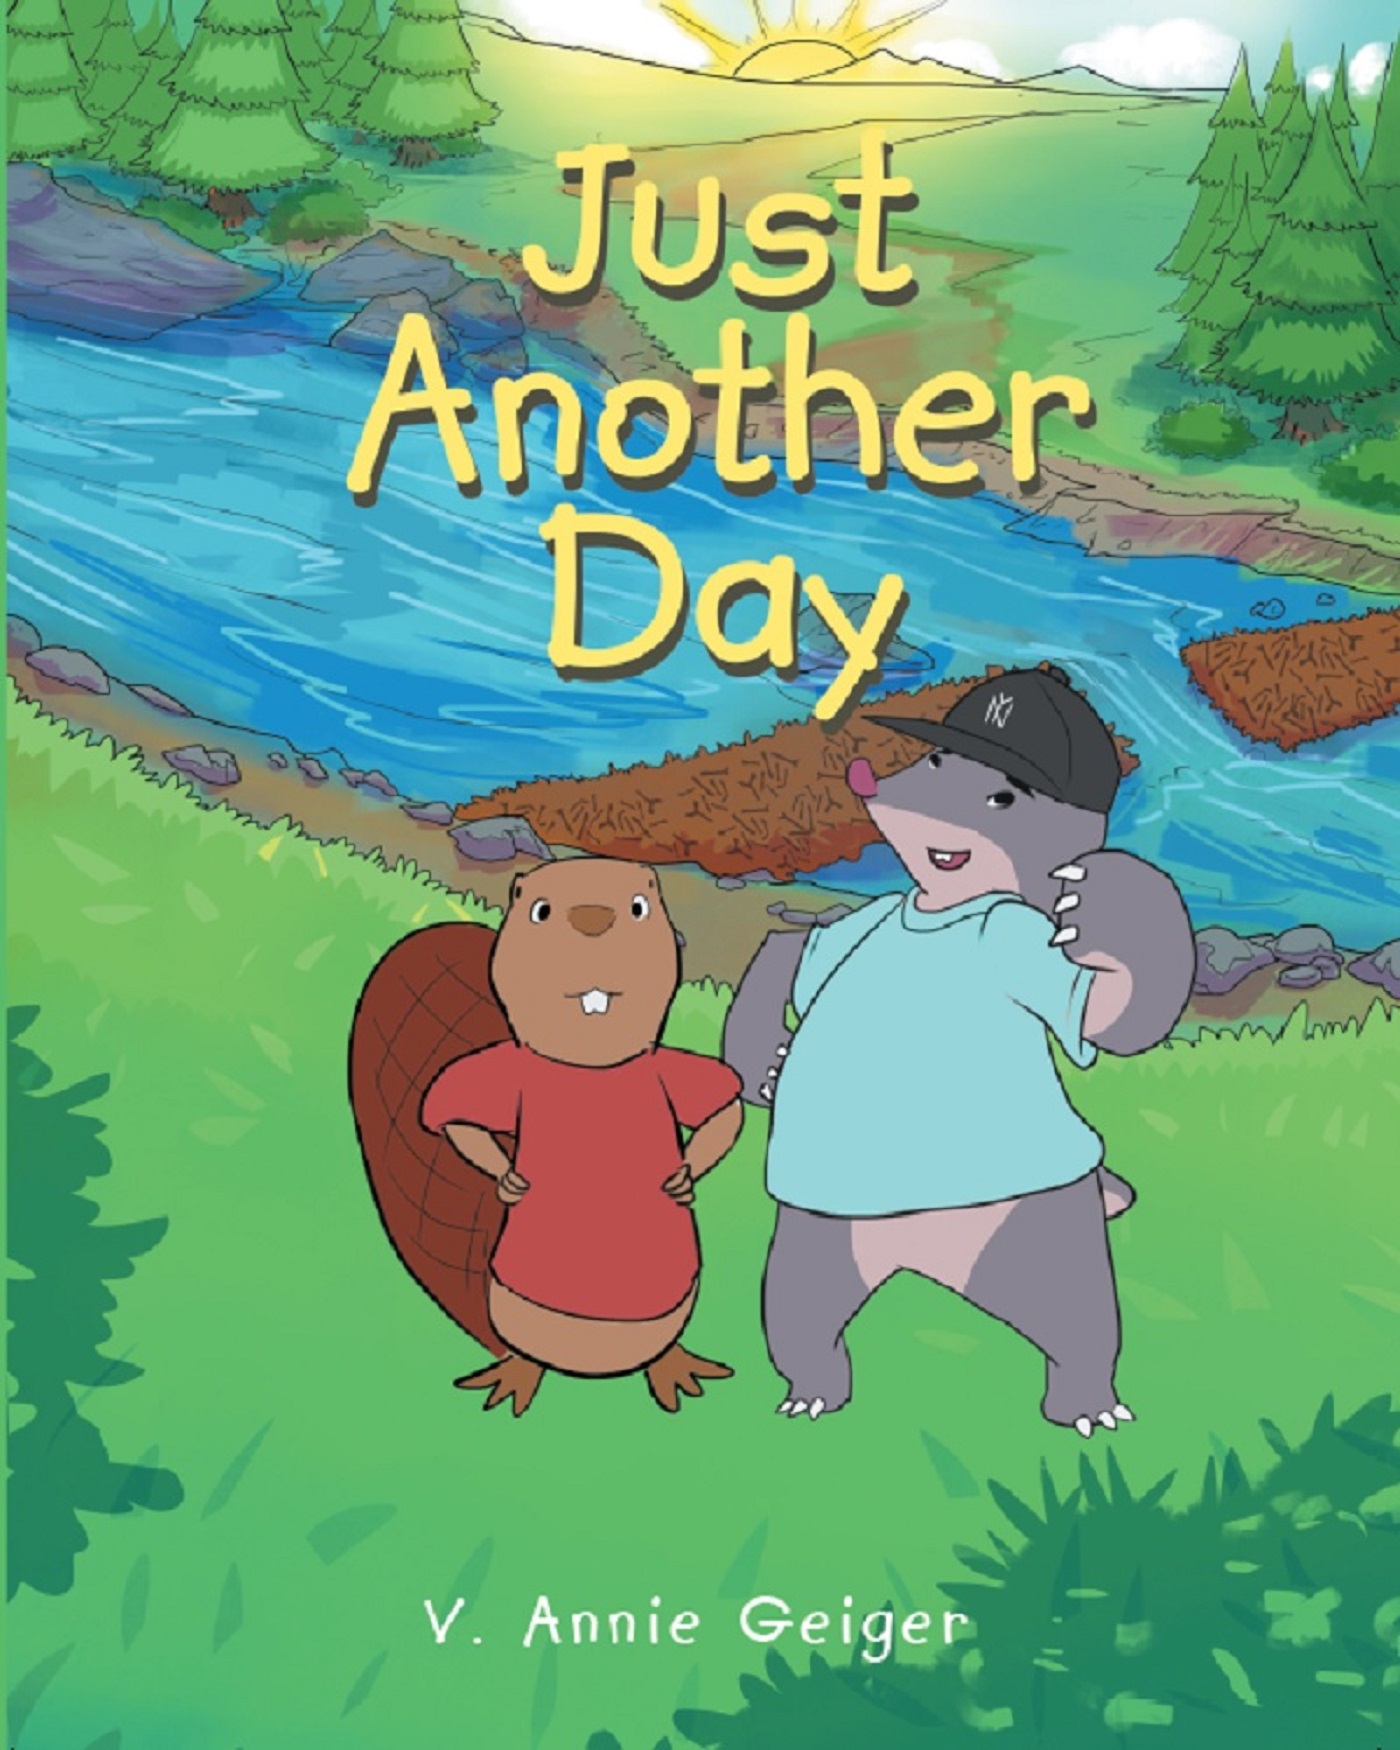 Just Another Day Cover Image